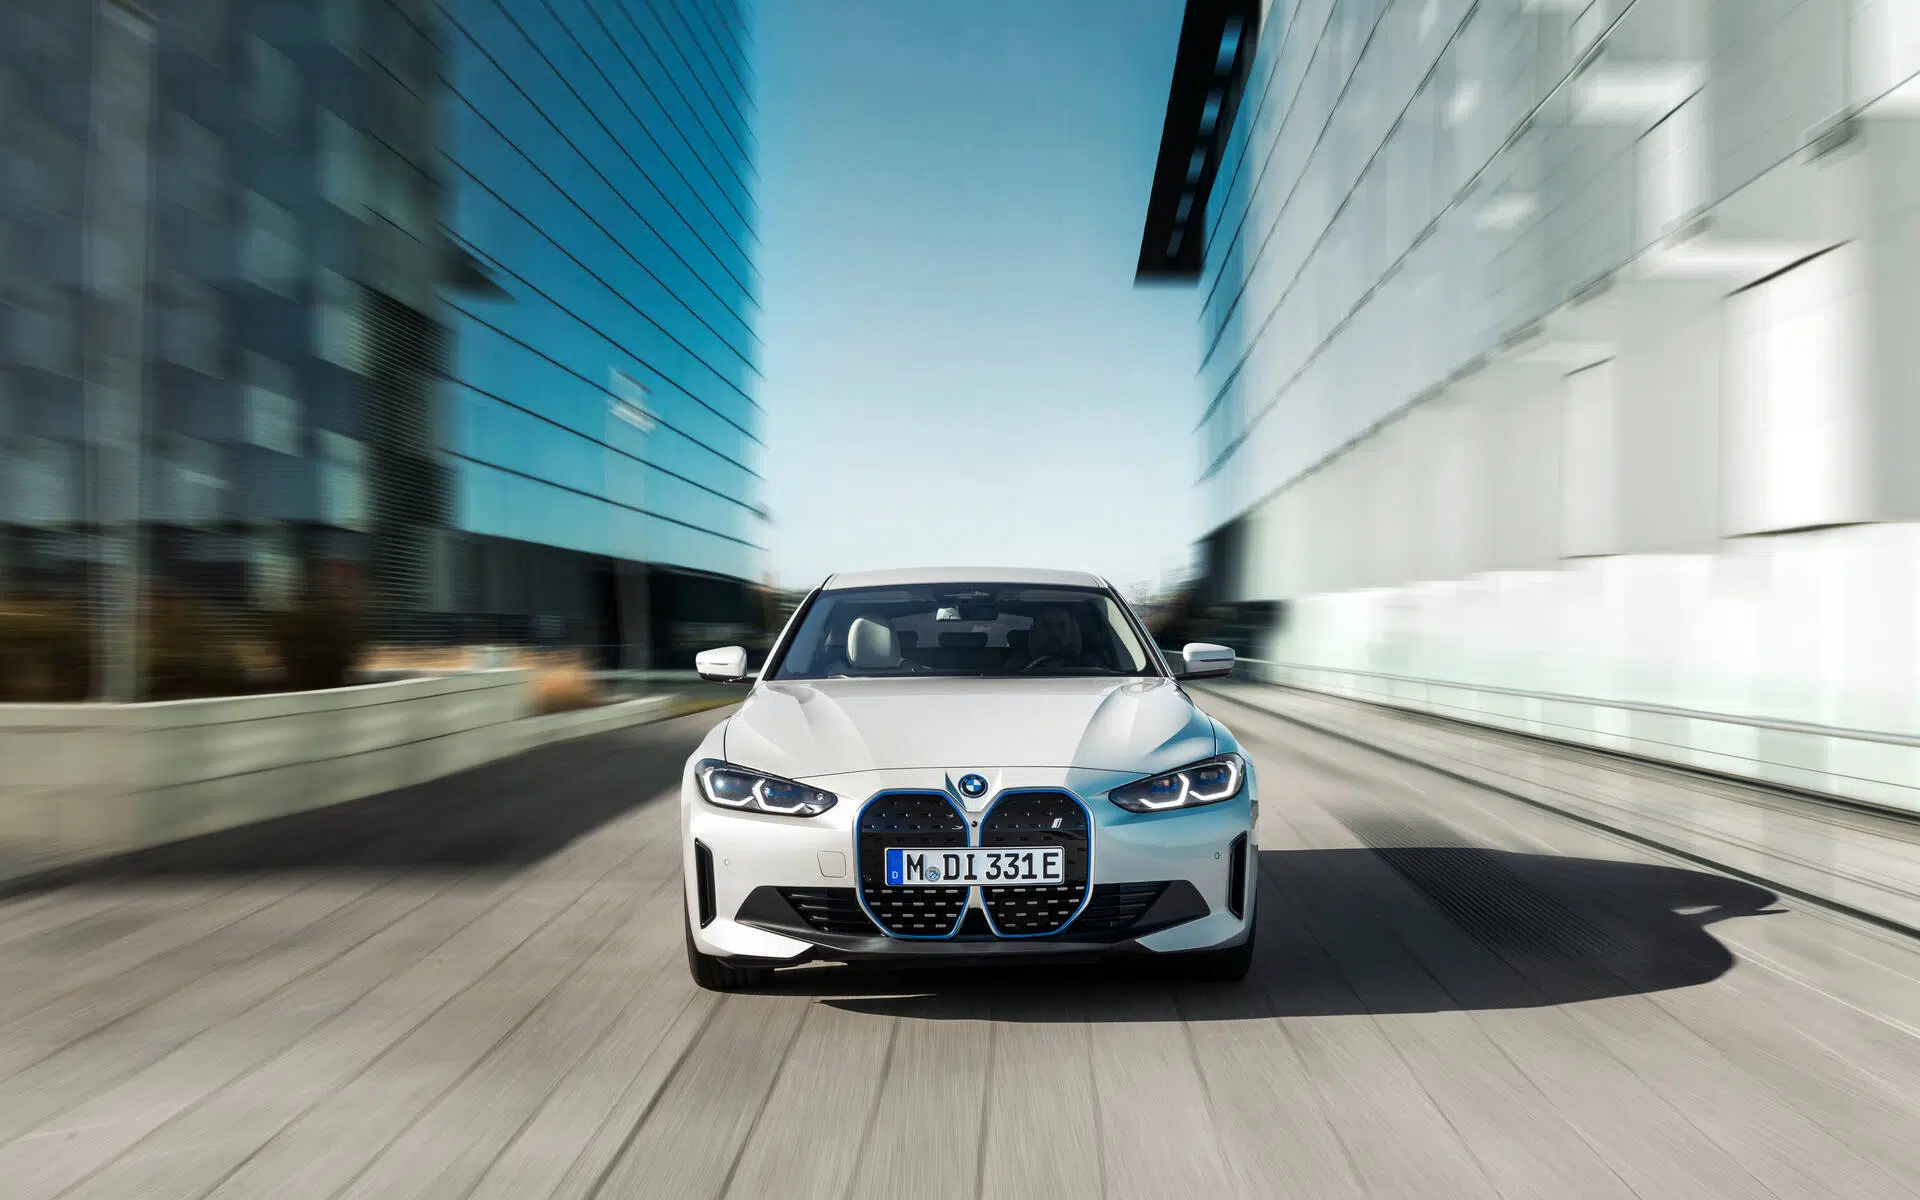 The BMW i4 M50 offers 536 horsepower. Source: www.guideauto.ca